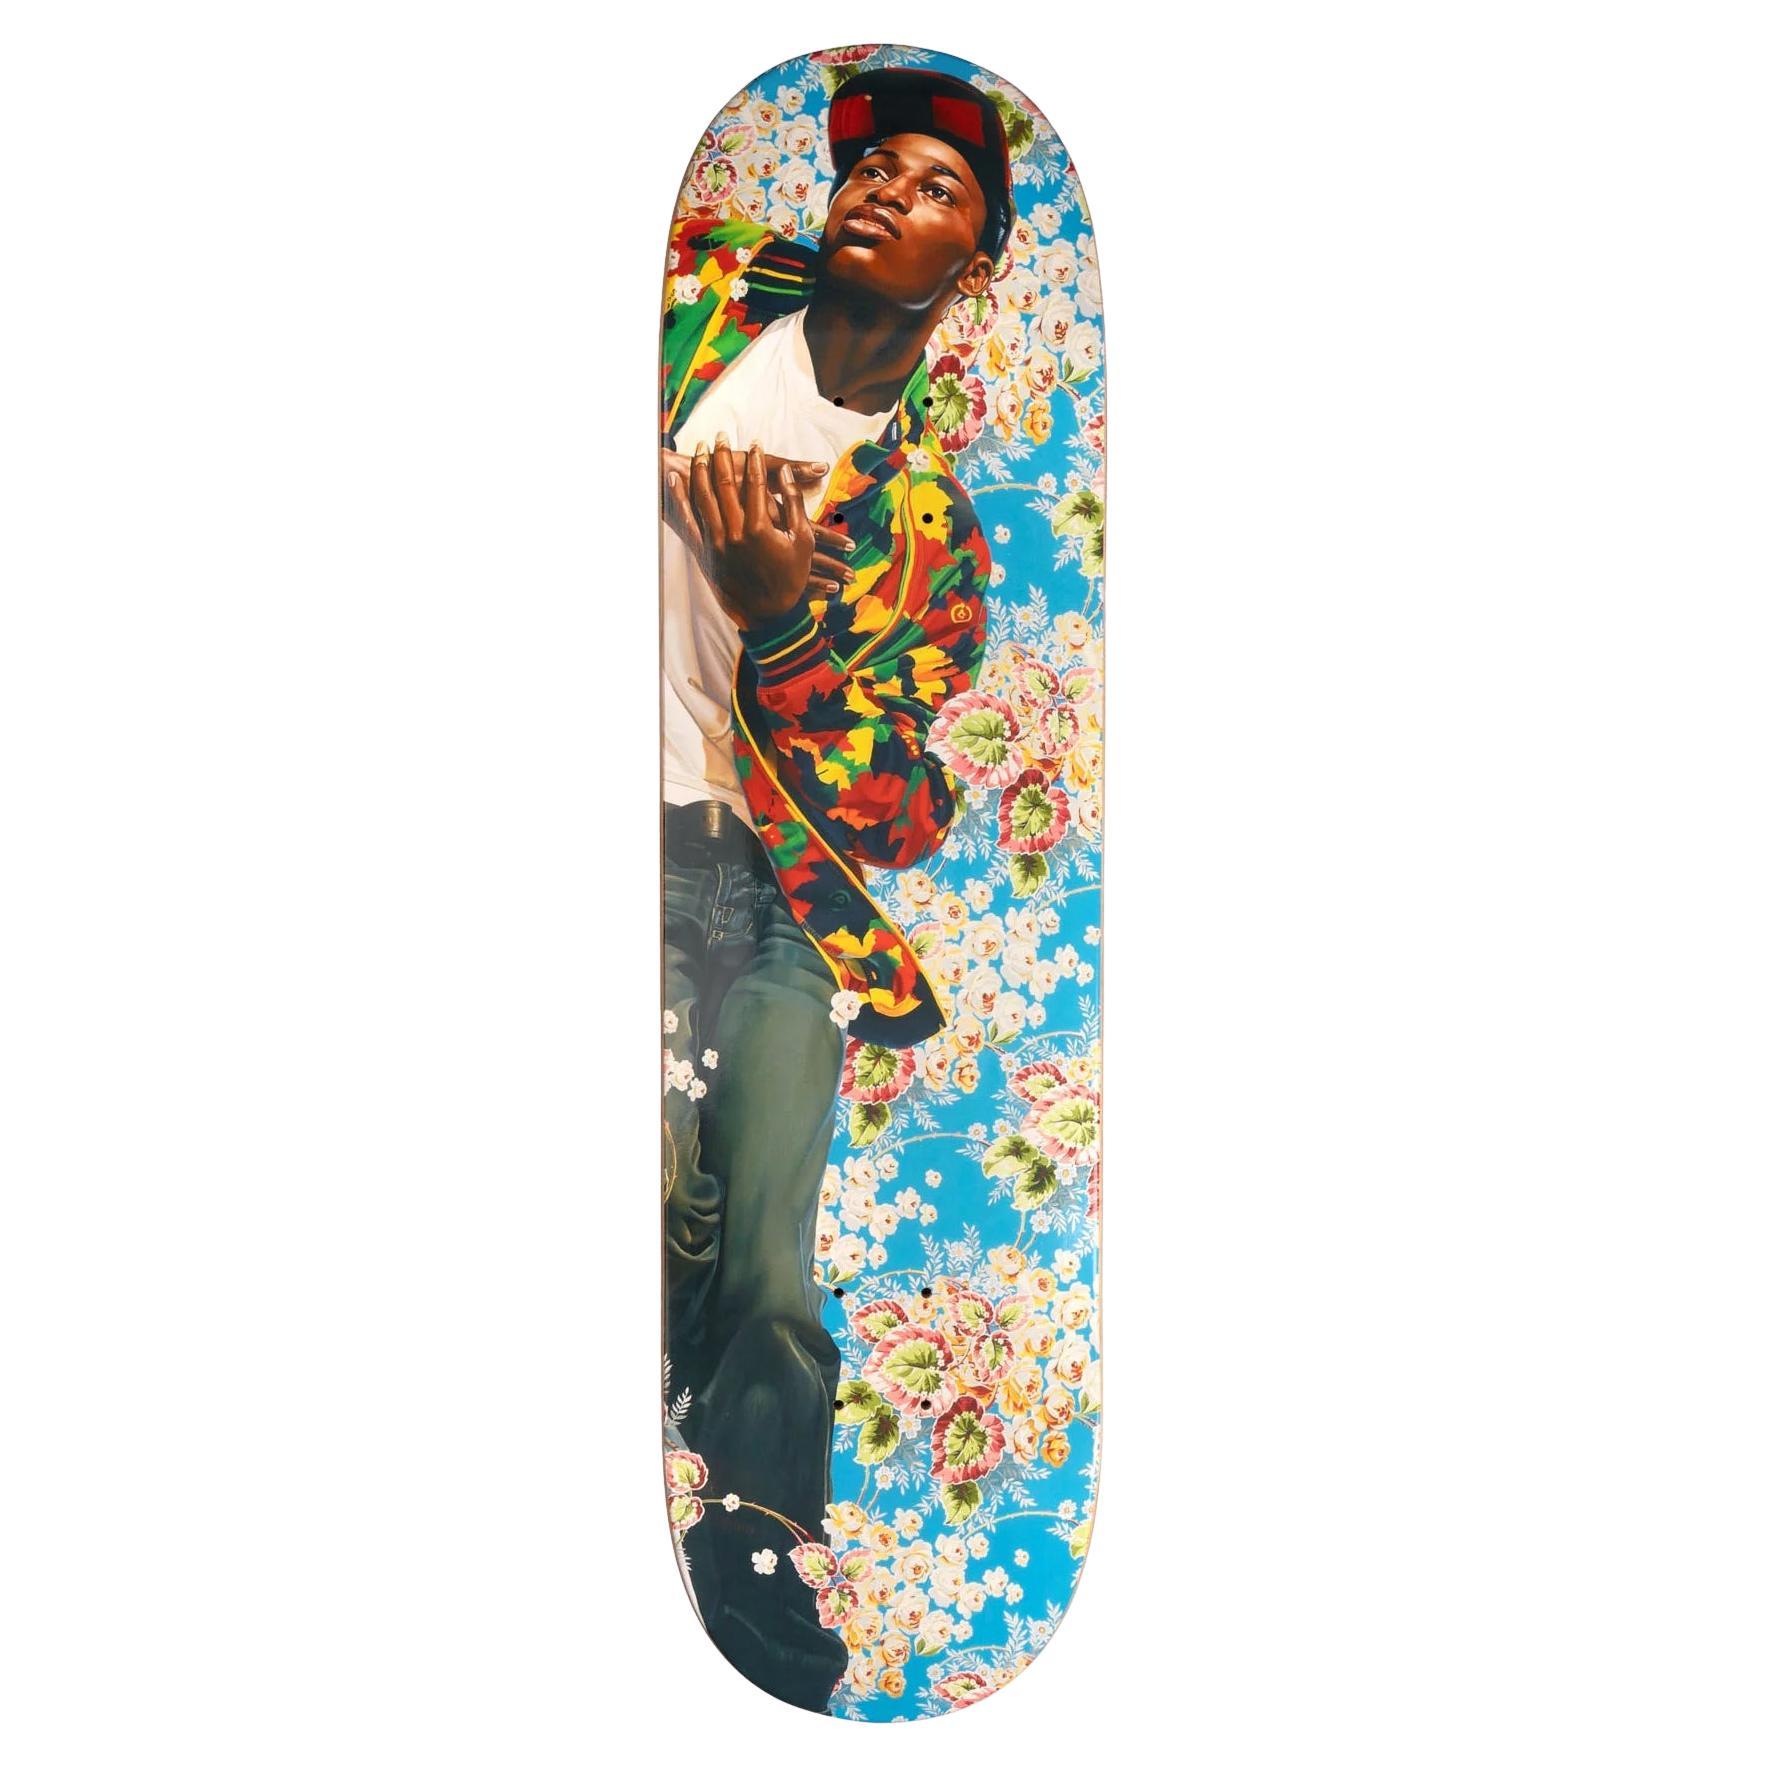 Christian Martyr Tarcisius Skateboard Deck by Kehinde Wiley For Sale